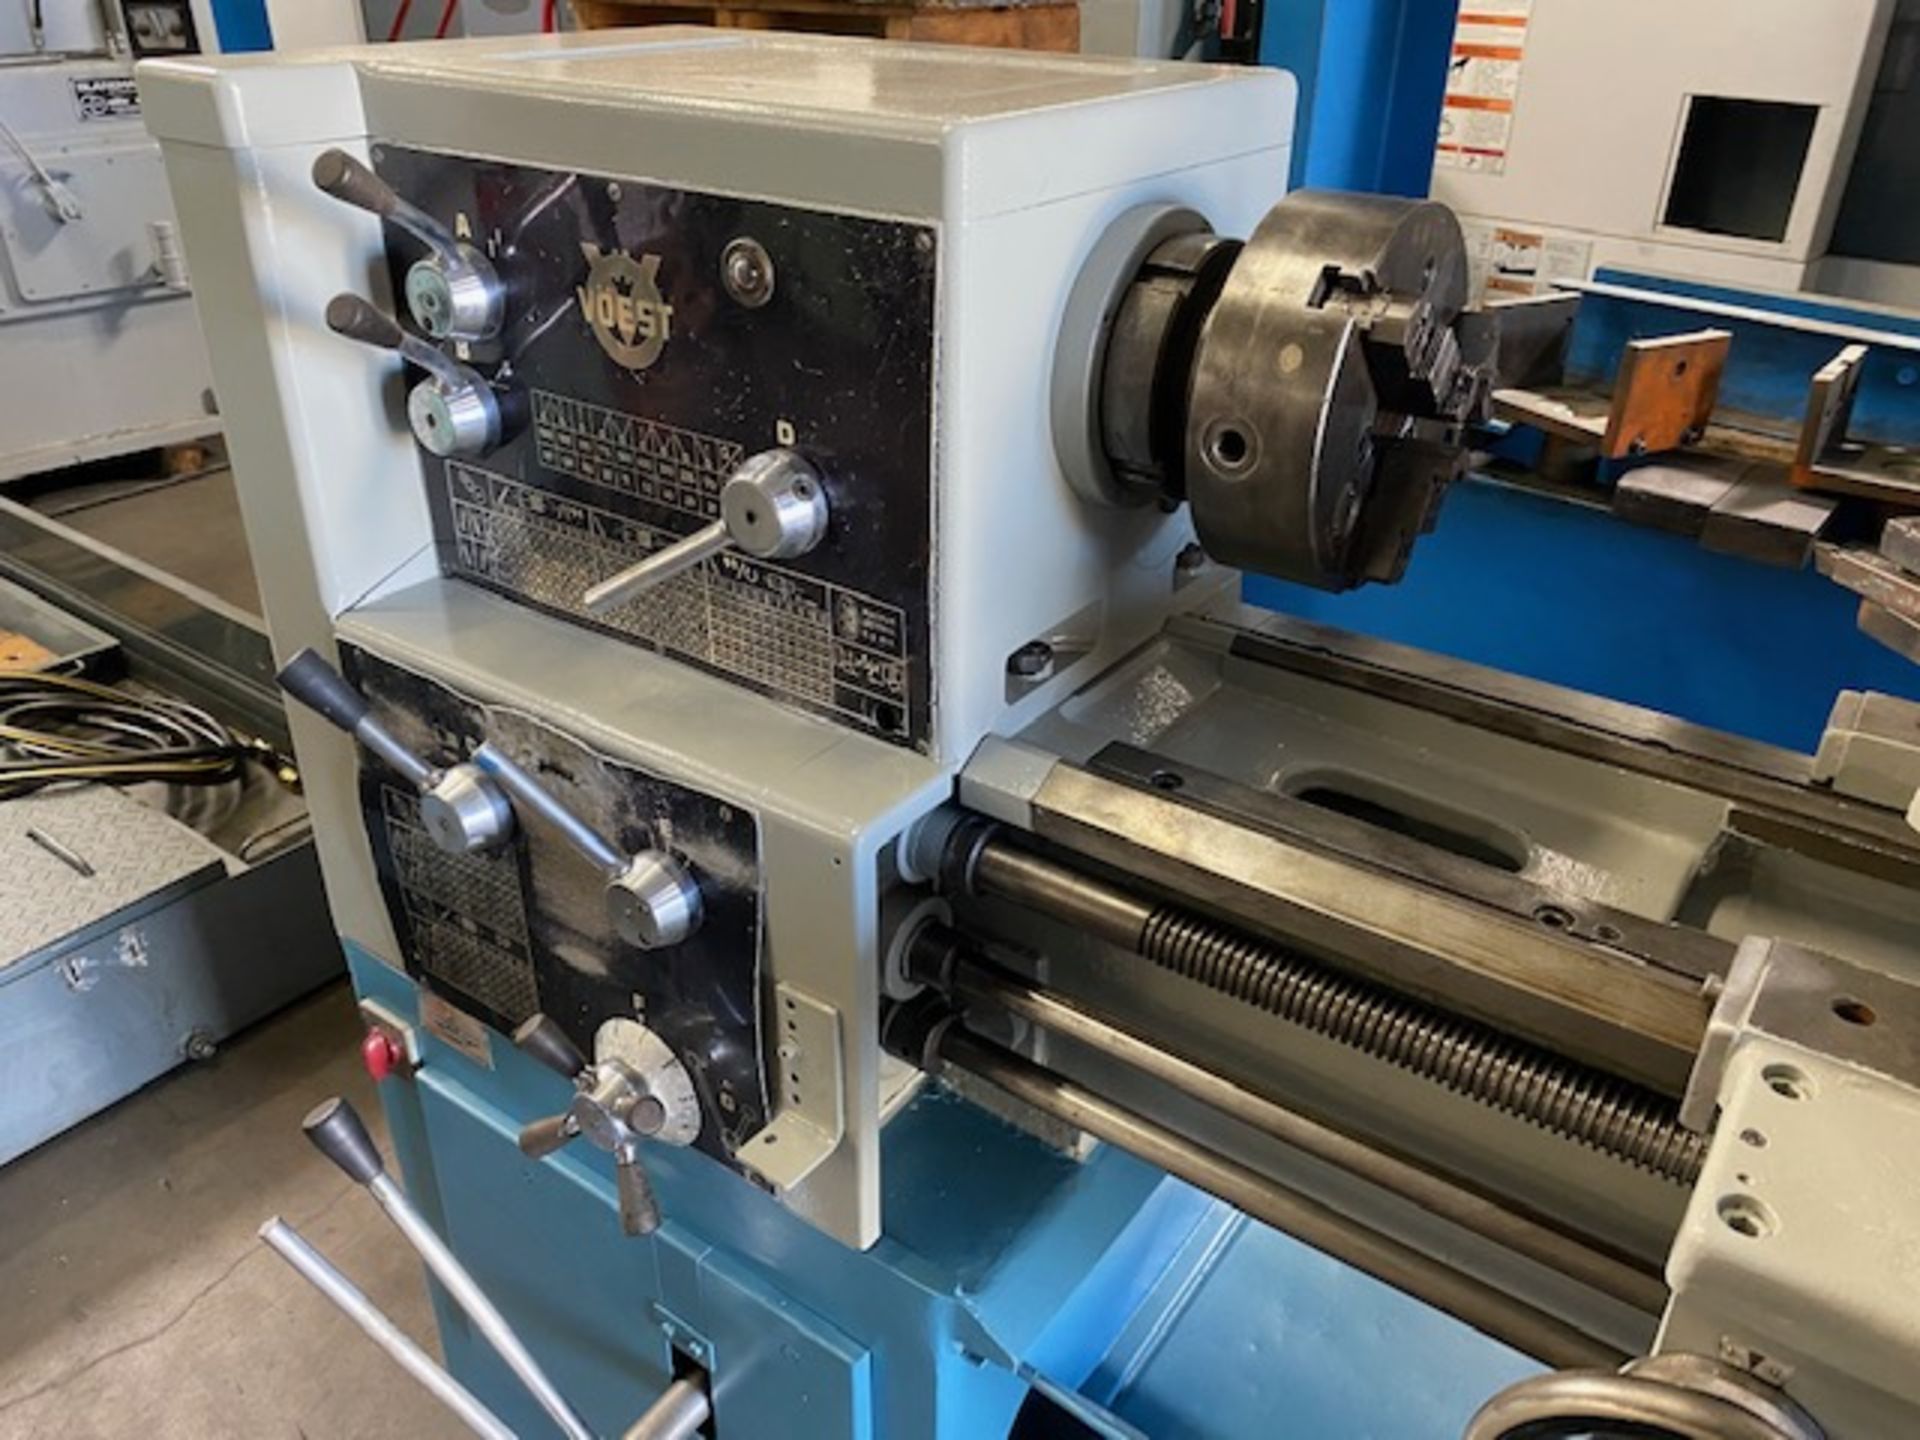 Voest DA 1.5 17”/28” x 60” Geared Head Gap Bed Lathe s/n 1037/1.5-4980 w/ 21-1500 RPM, SOLD AS IS - Image 3 of 9